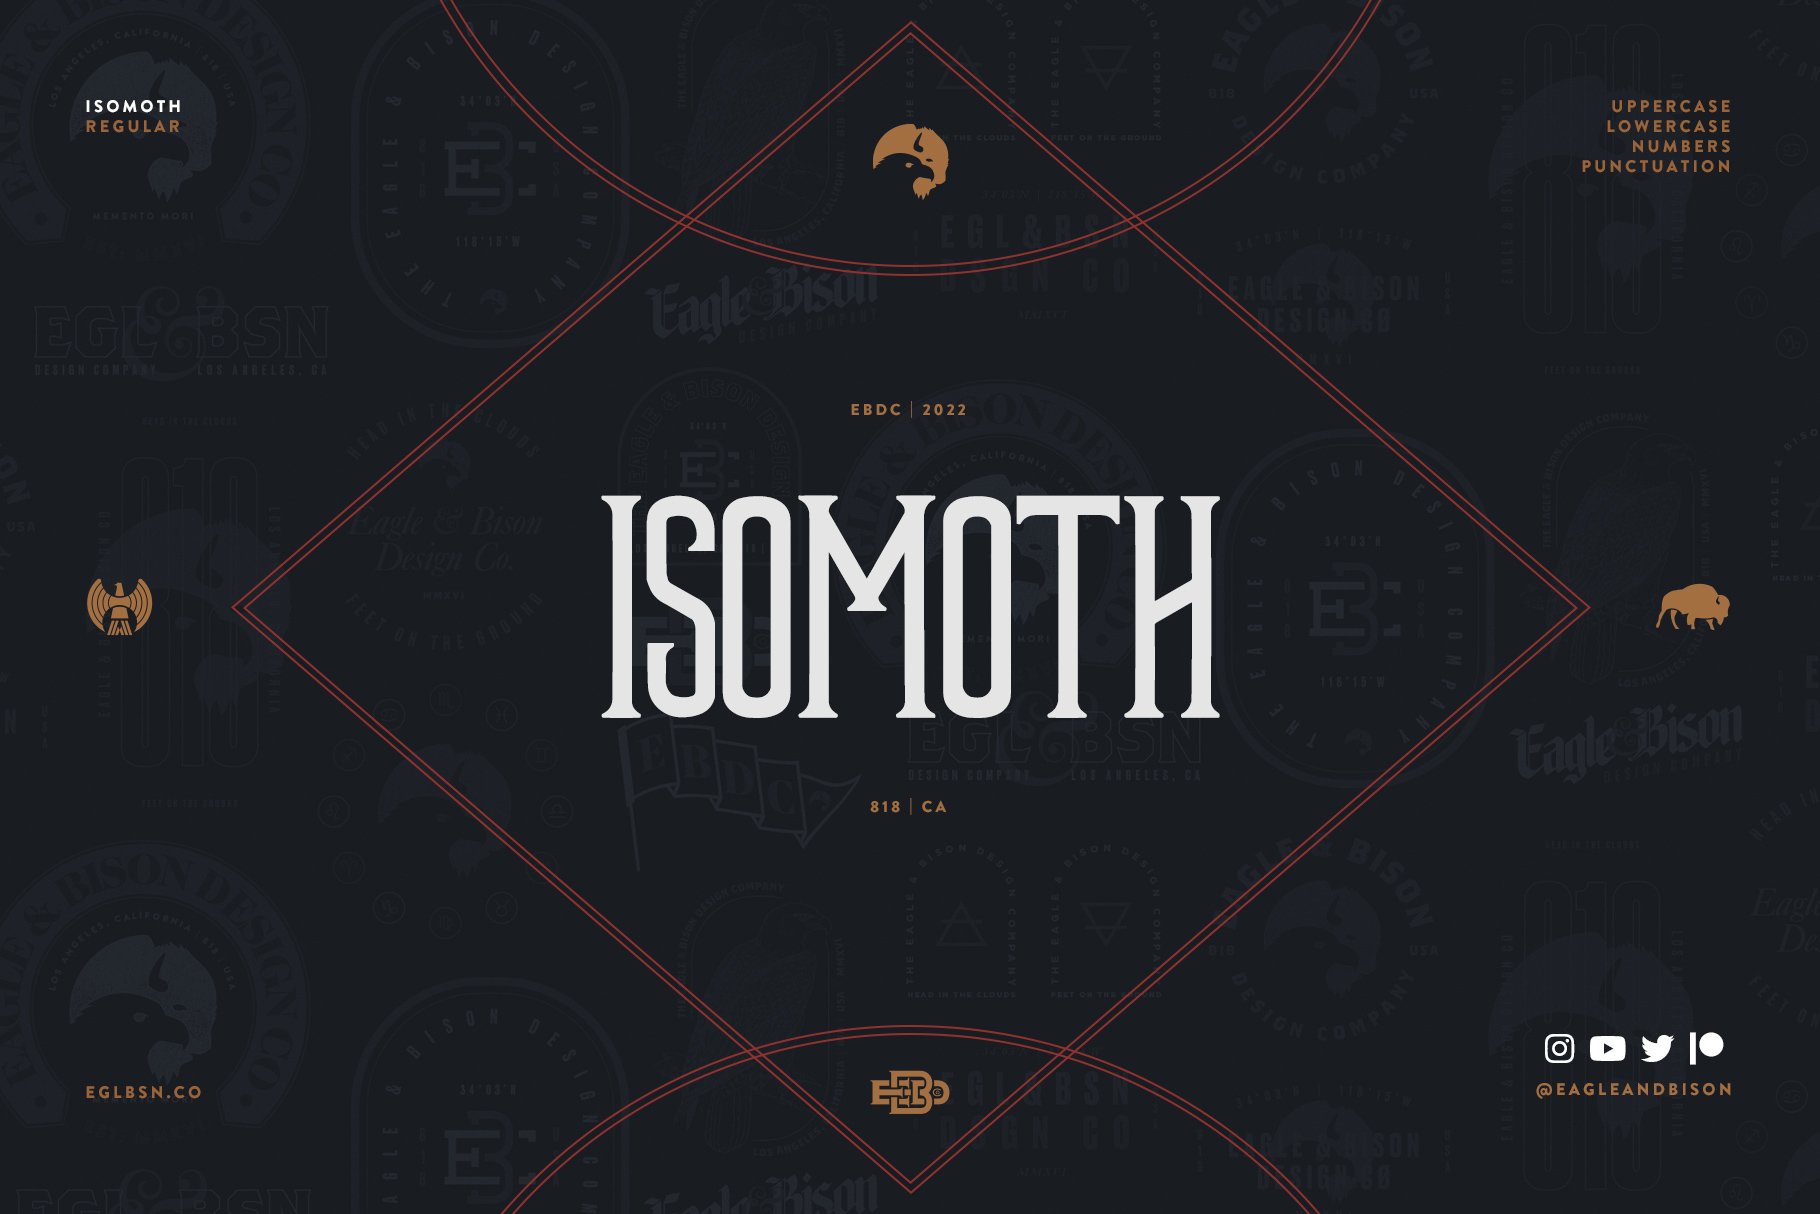 Isomoth Pro cover image.